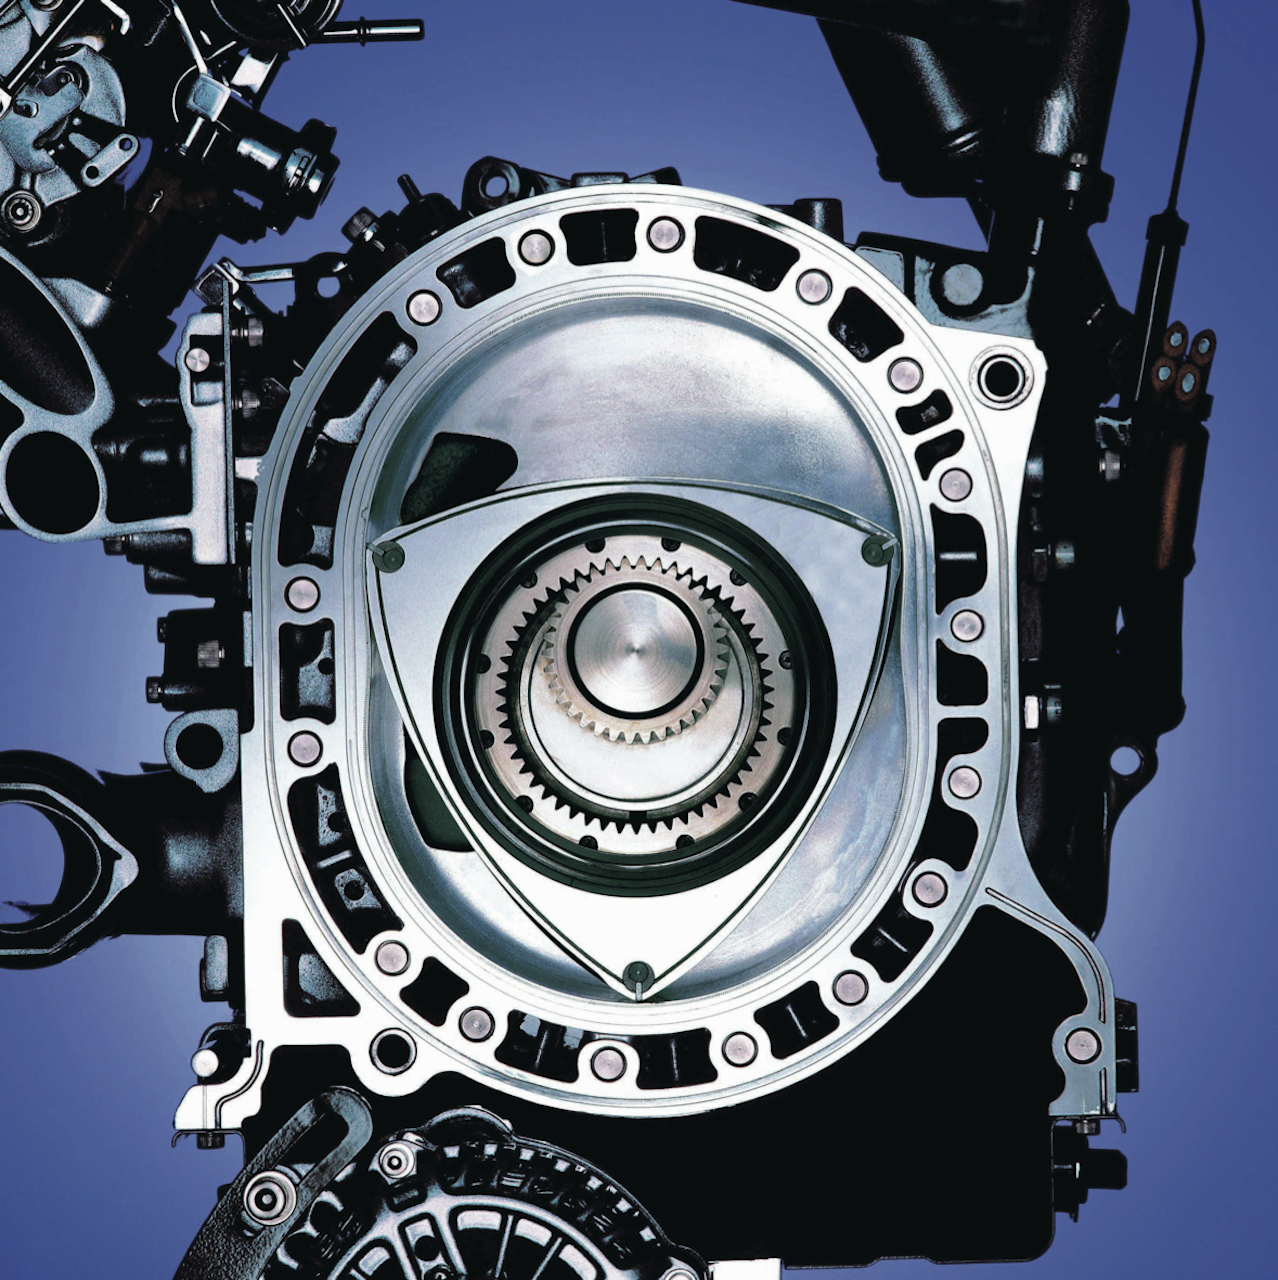 The Rotary engine design is unique to Miata cars since the 1960s.